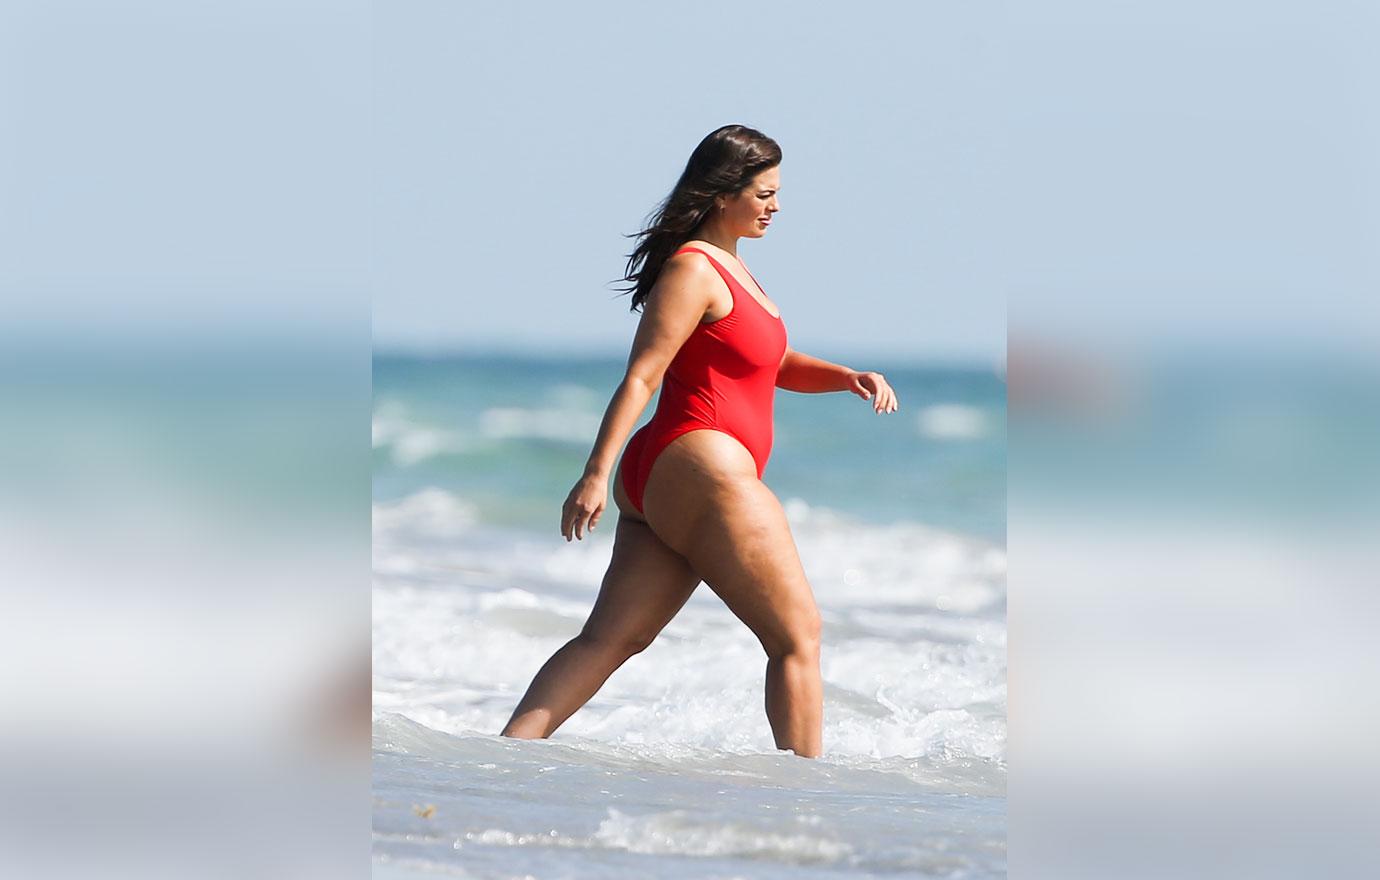 Ashley Graham Plus Size Model Boobs Butt Photos -- Sports Illustrated Girl  In A Red Suit Miami